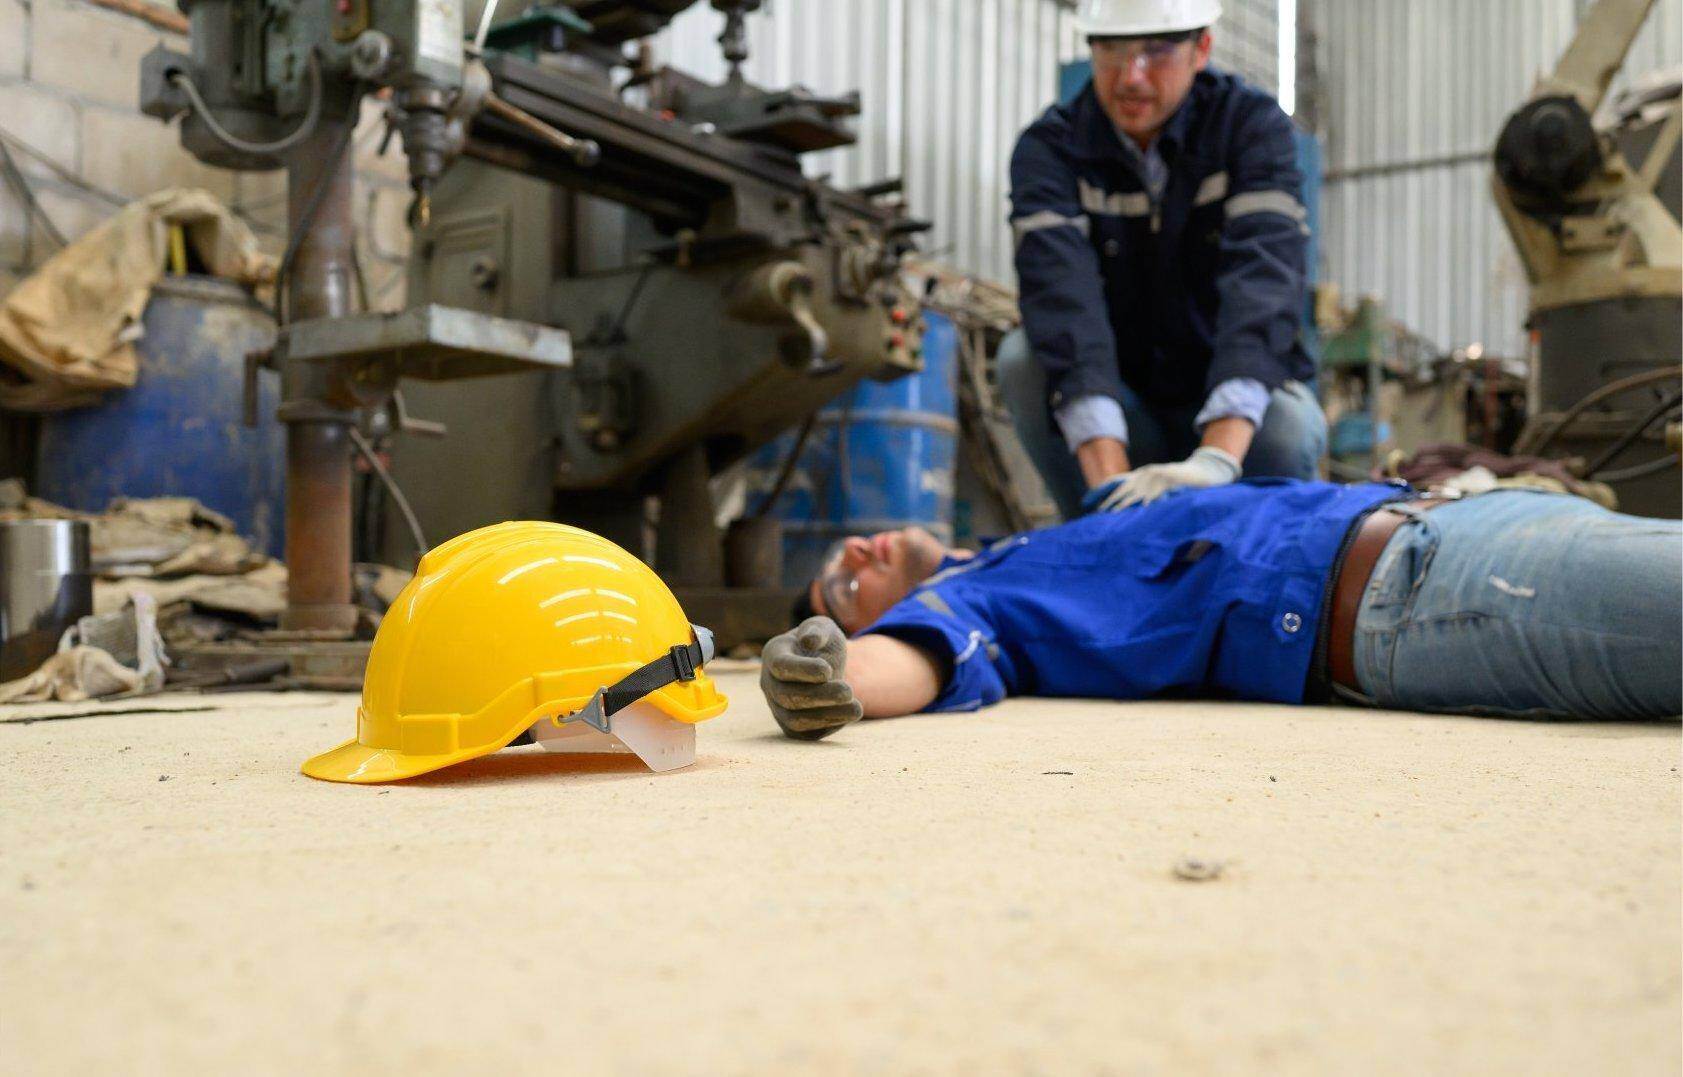 An unconscious man who has been injured on the job who will file for workers compensation in North Decatur, Georgia